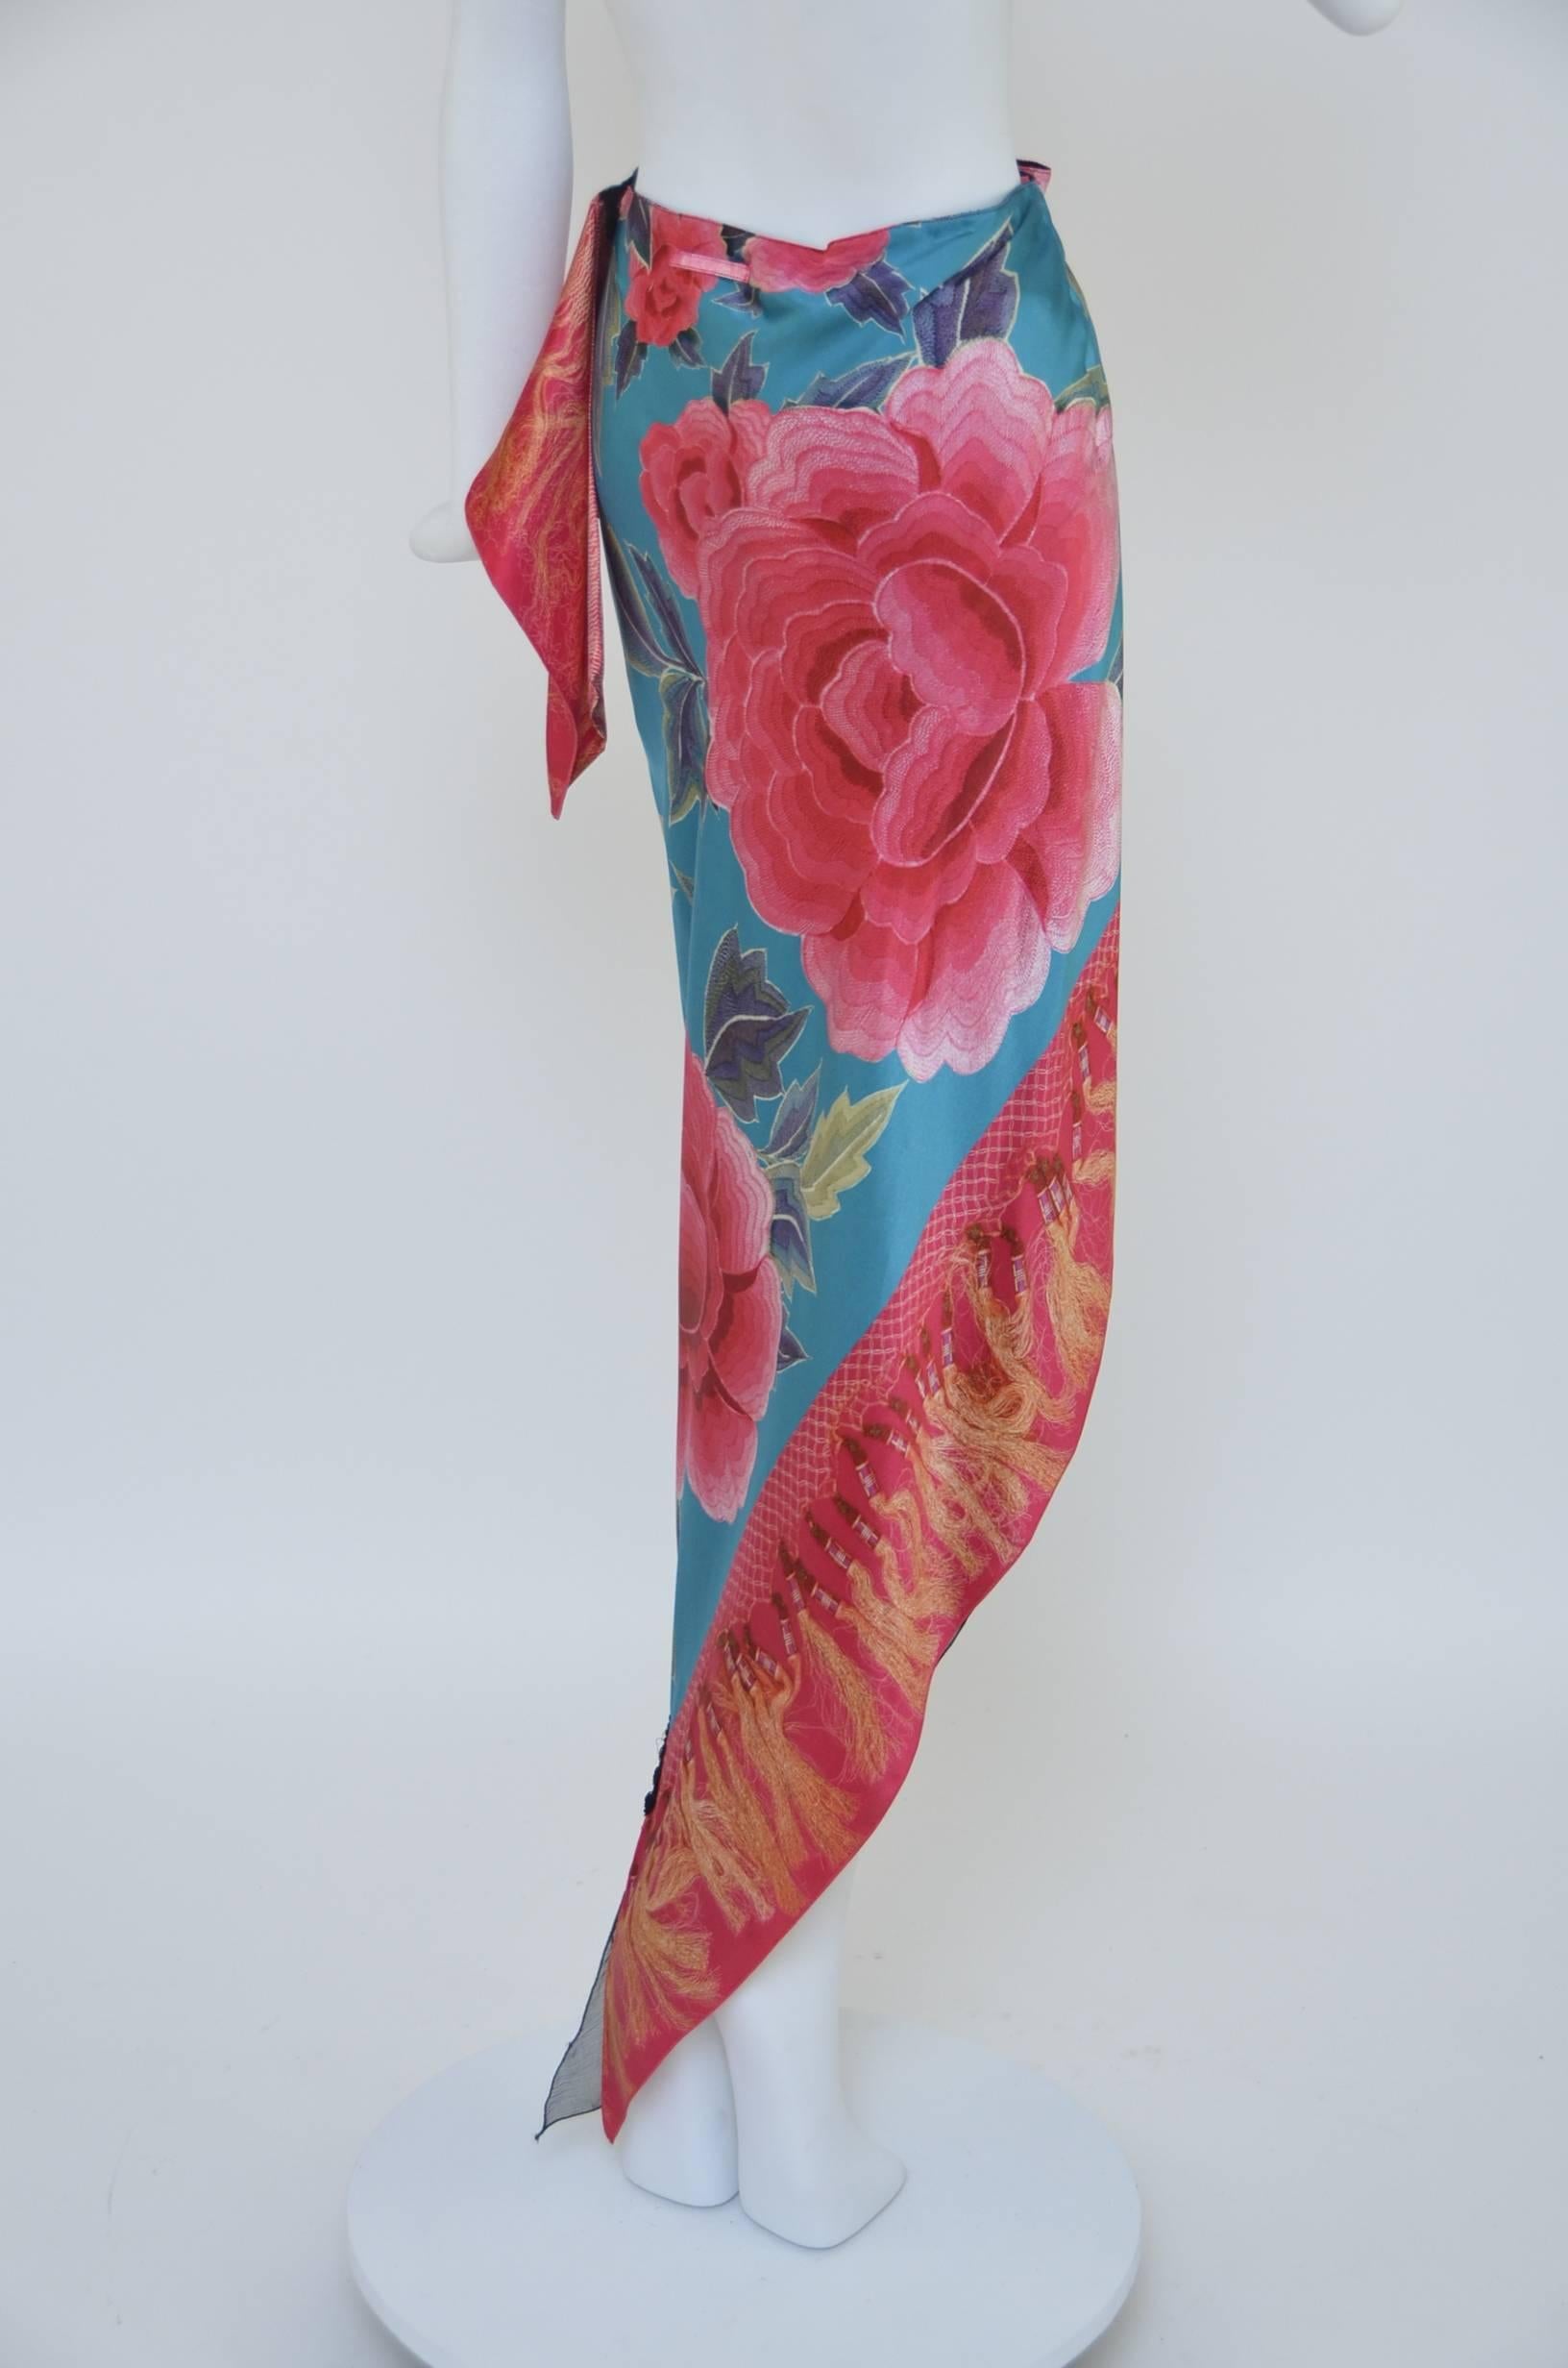 Beautiful  and very unusual wrap skirt  with  scarf shape  when fully open.
2 snap closure at waist.
Measurements: Waist 28